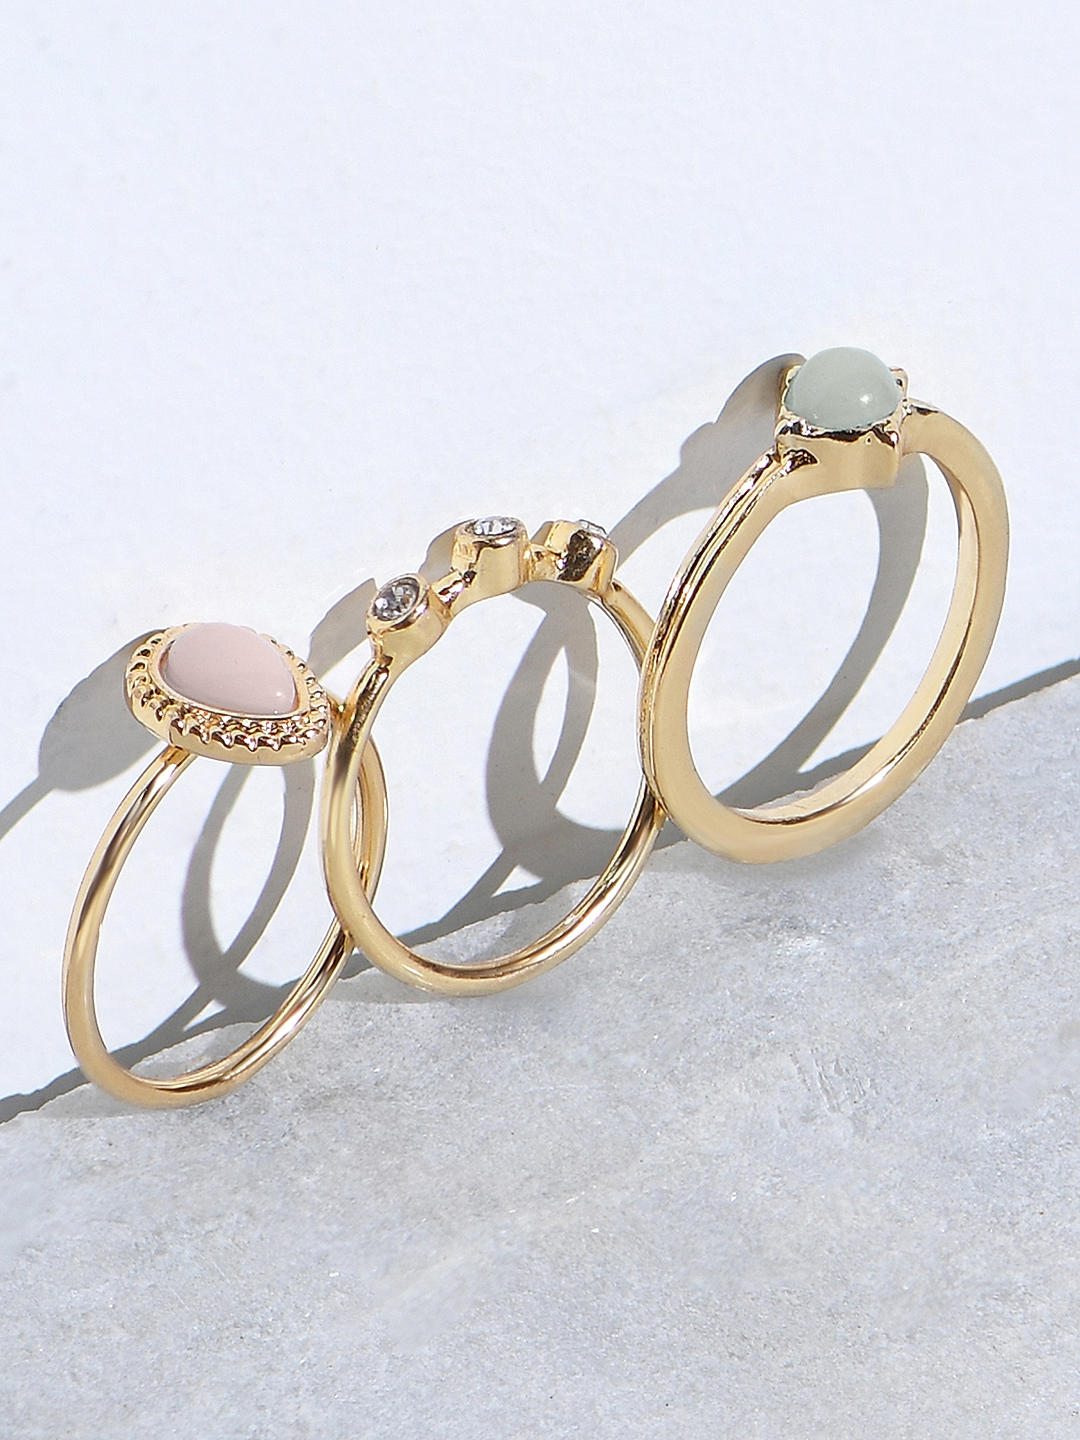 US Warehouse Boho Style Finger Ring Set Cool Girls Triangle Star Fishtail  Shaped Joint Knuckle Nail Statement Ring Set For Women Girls From Idealway,  $3.02 | DHgate.Com